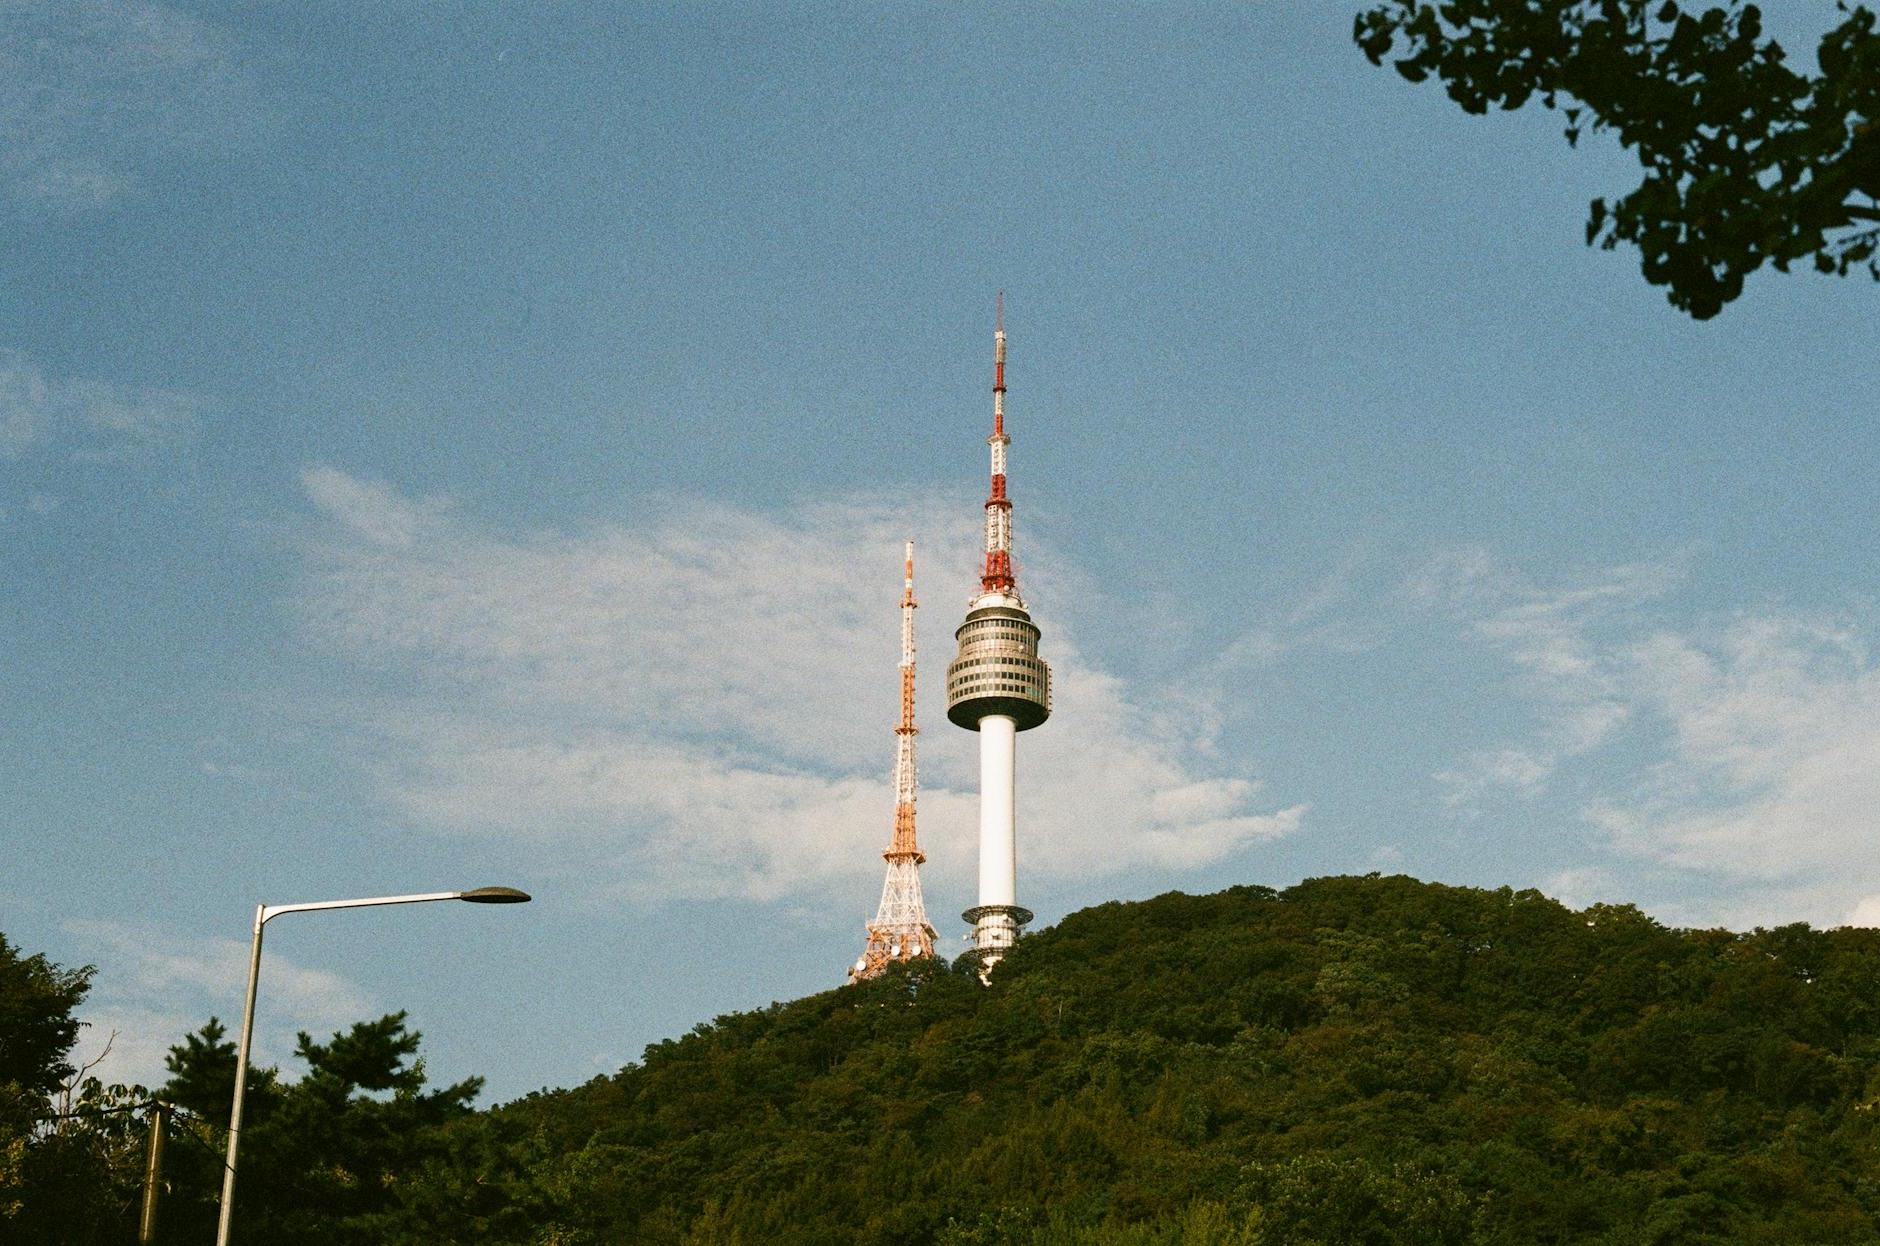 Low Angle Shot of N Seoul Tower